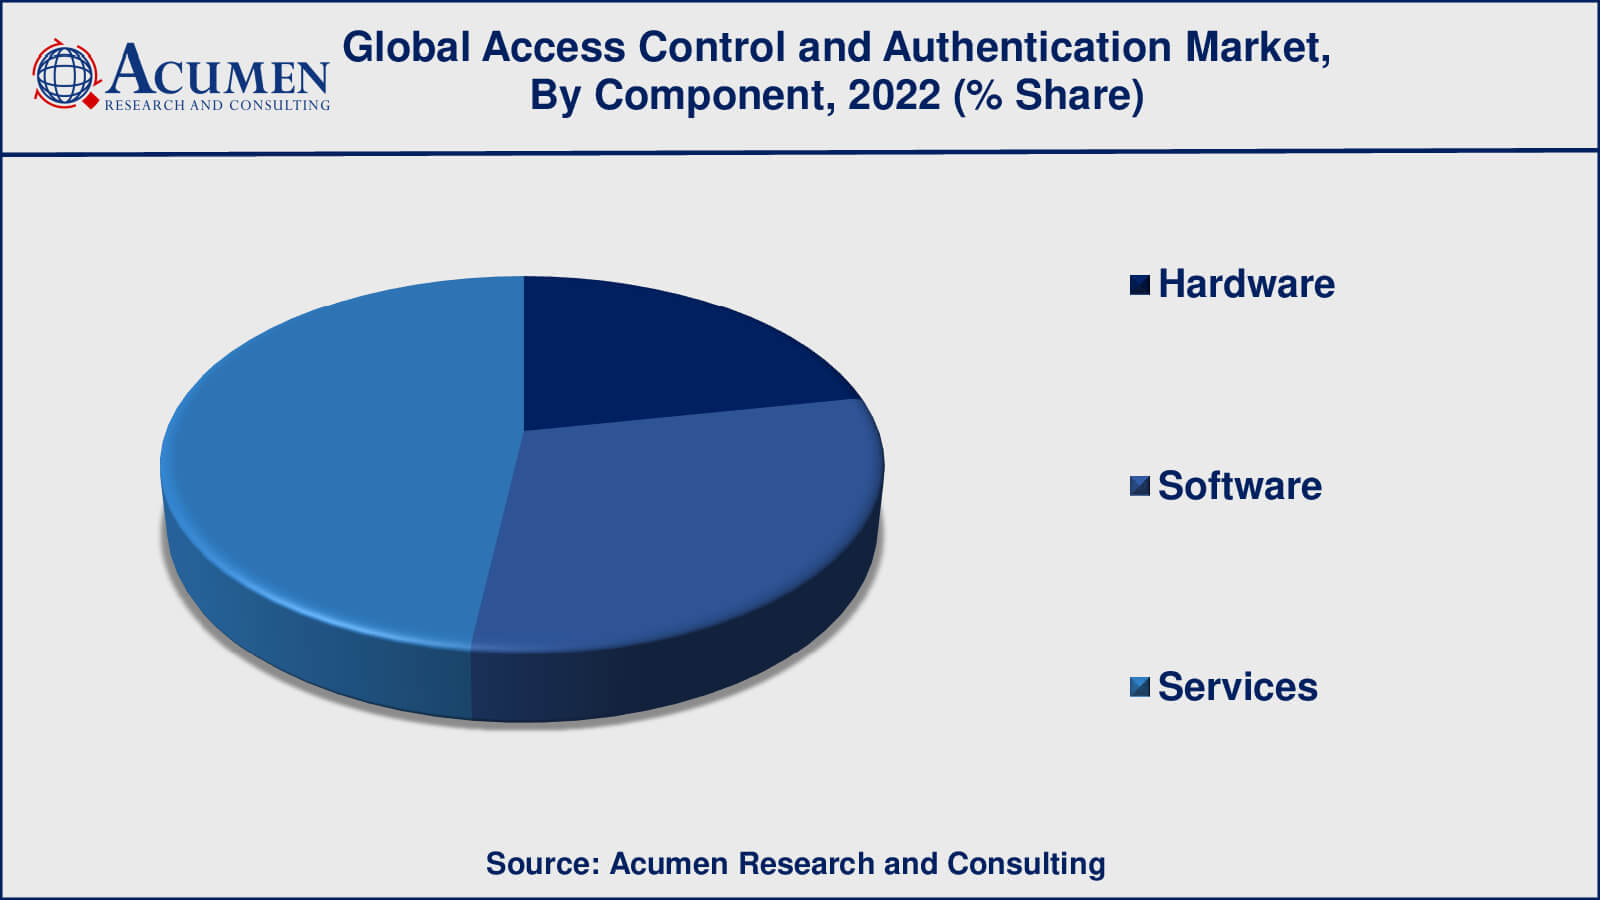 Access Control and Authentication Market Growth Factors